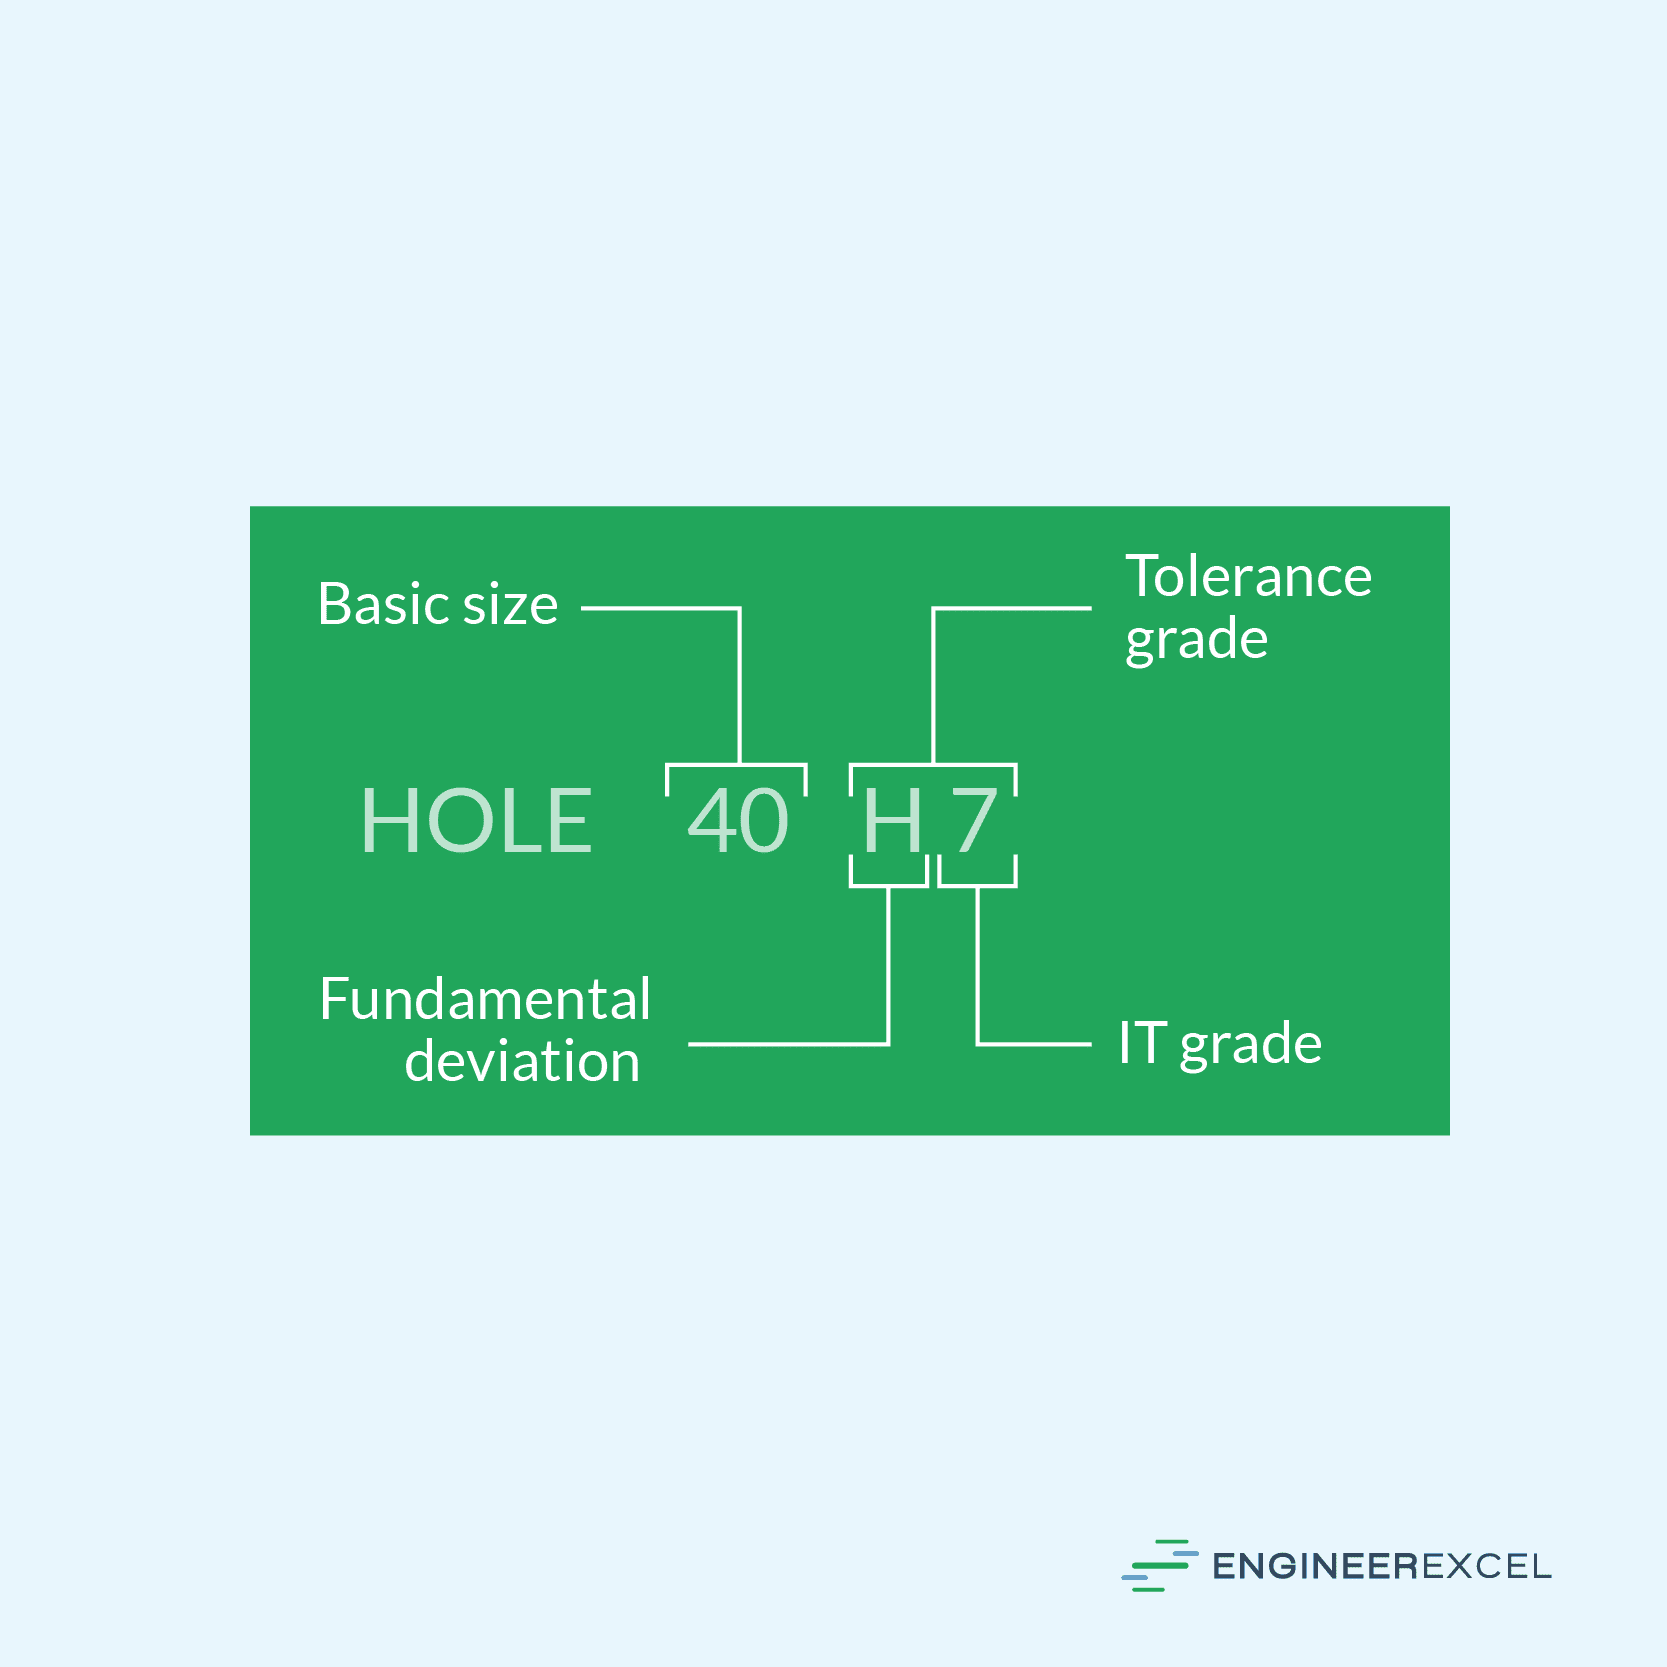 Hole tolerancing using ISO 286